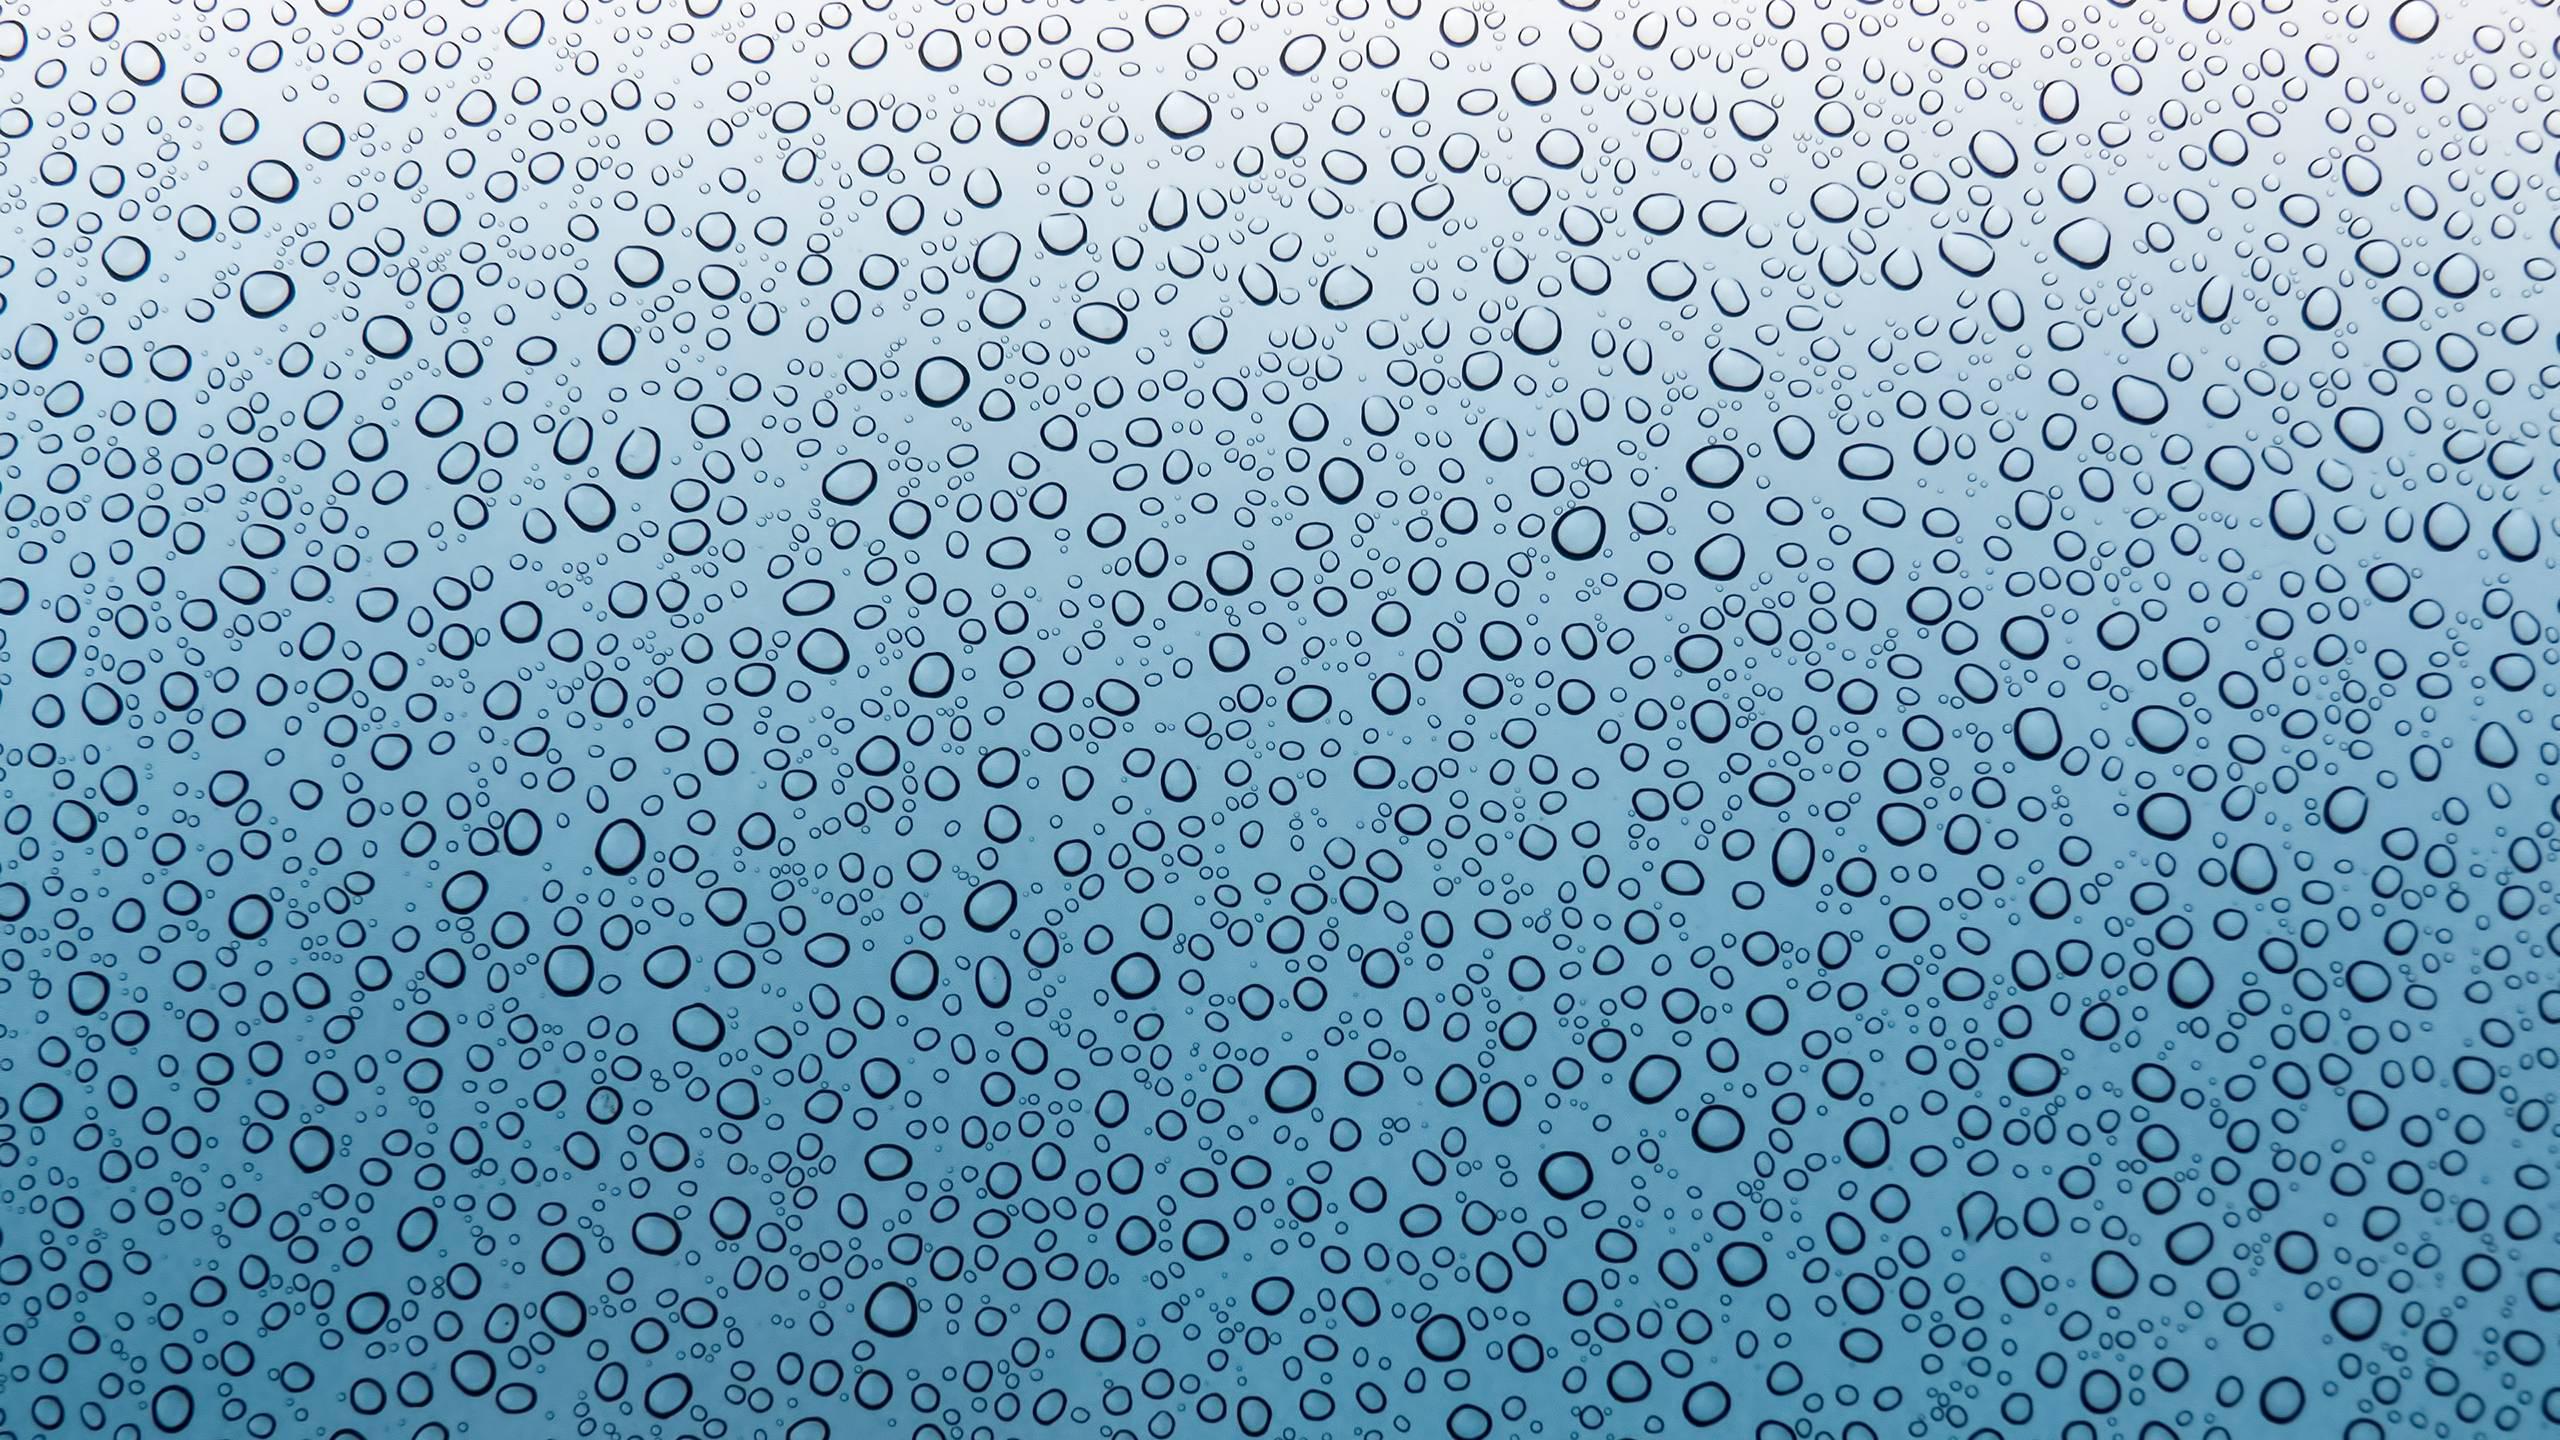 Rain drops - (#159858) - High Quality and Resolution Wallpapers on ...